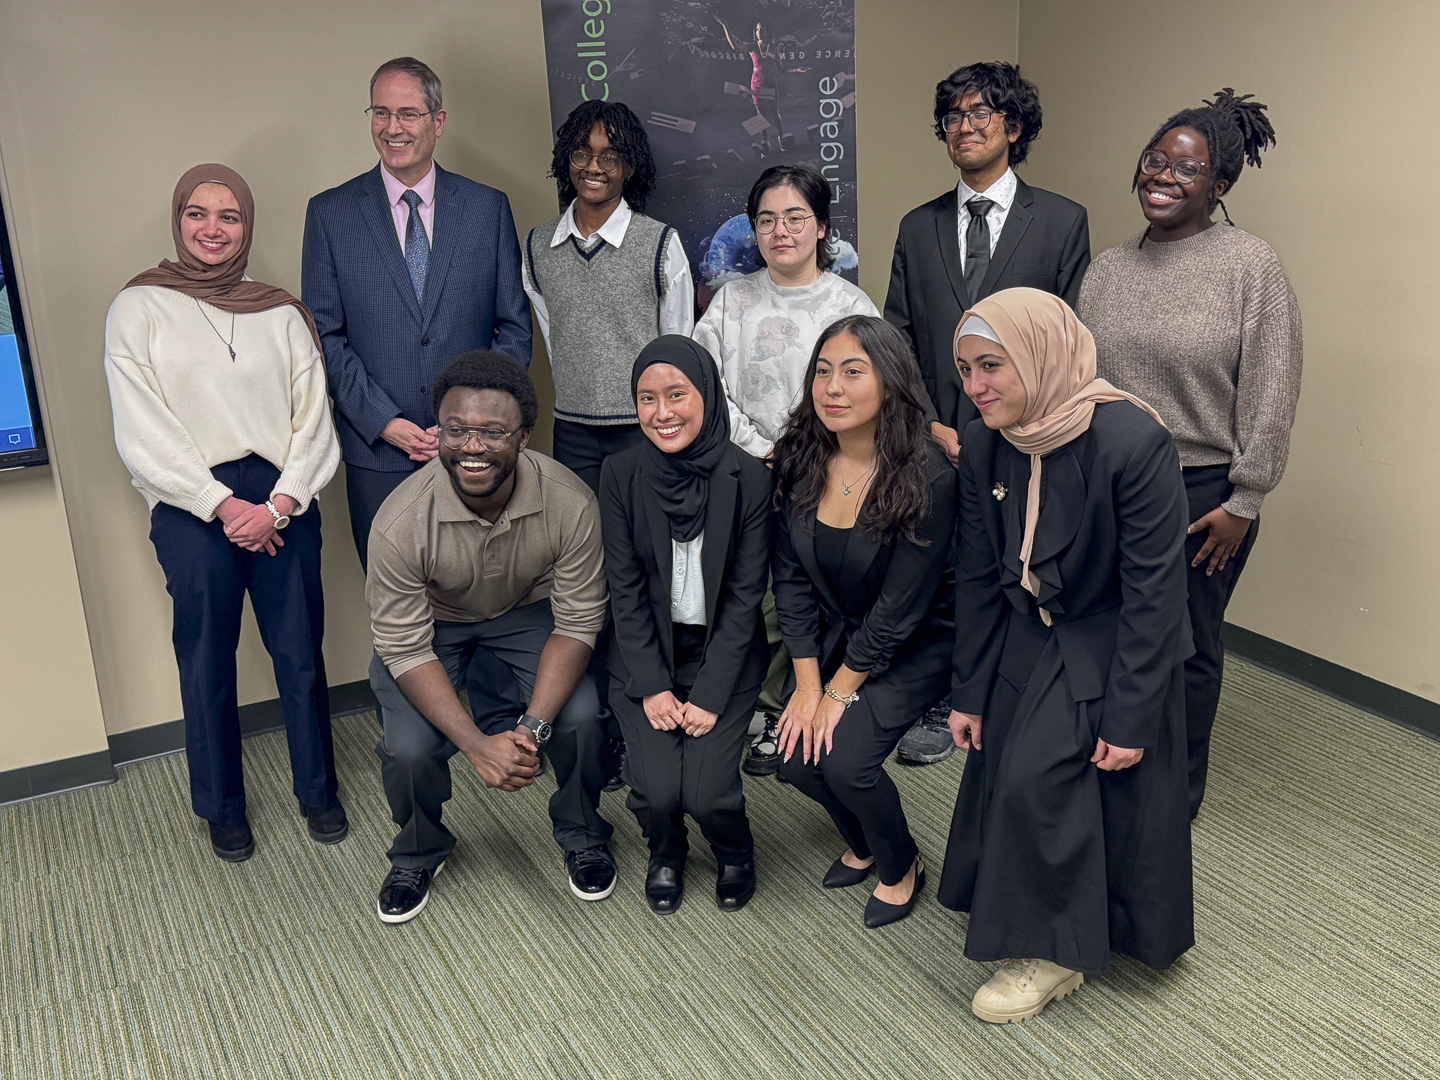 College of Social Science Diversity Research Showcase winners